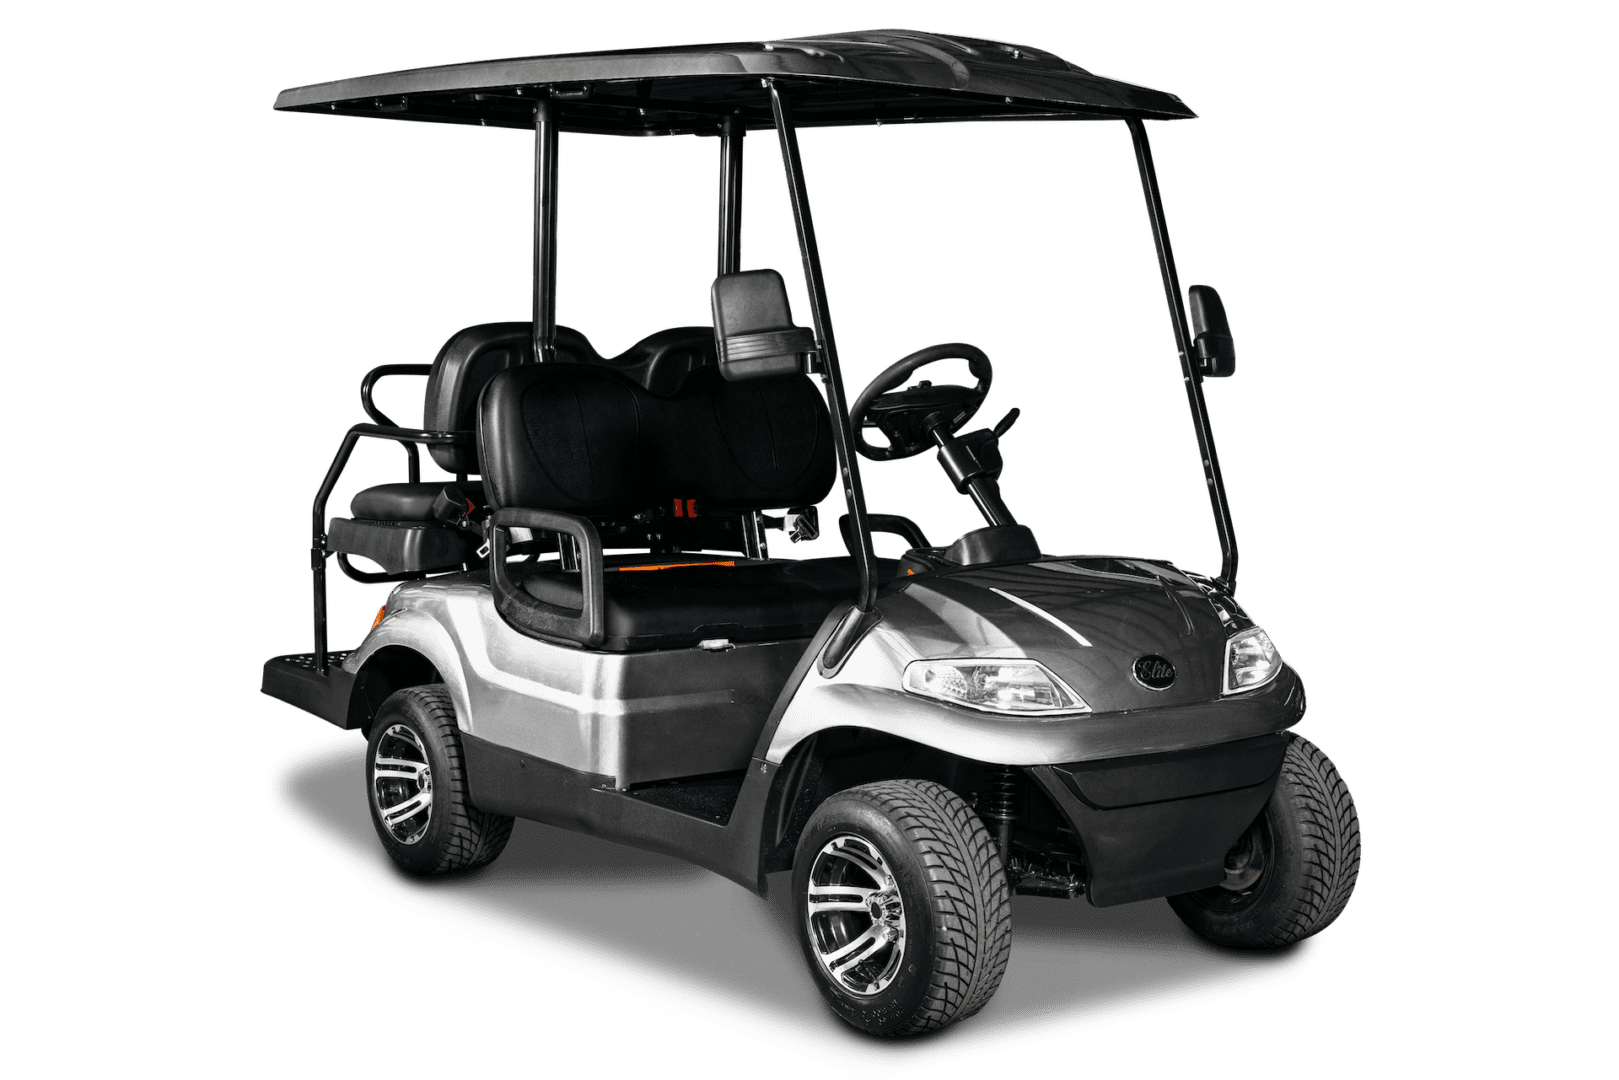 A golf cart with two seats and a canopy.